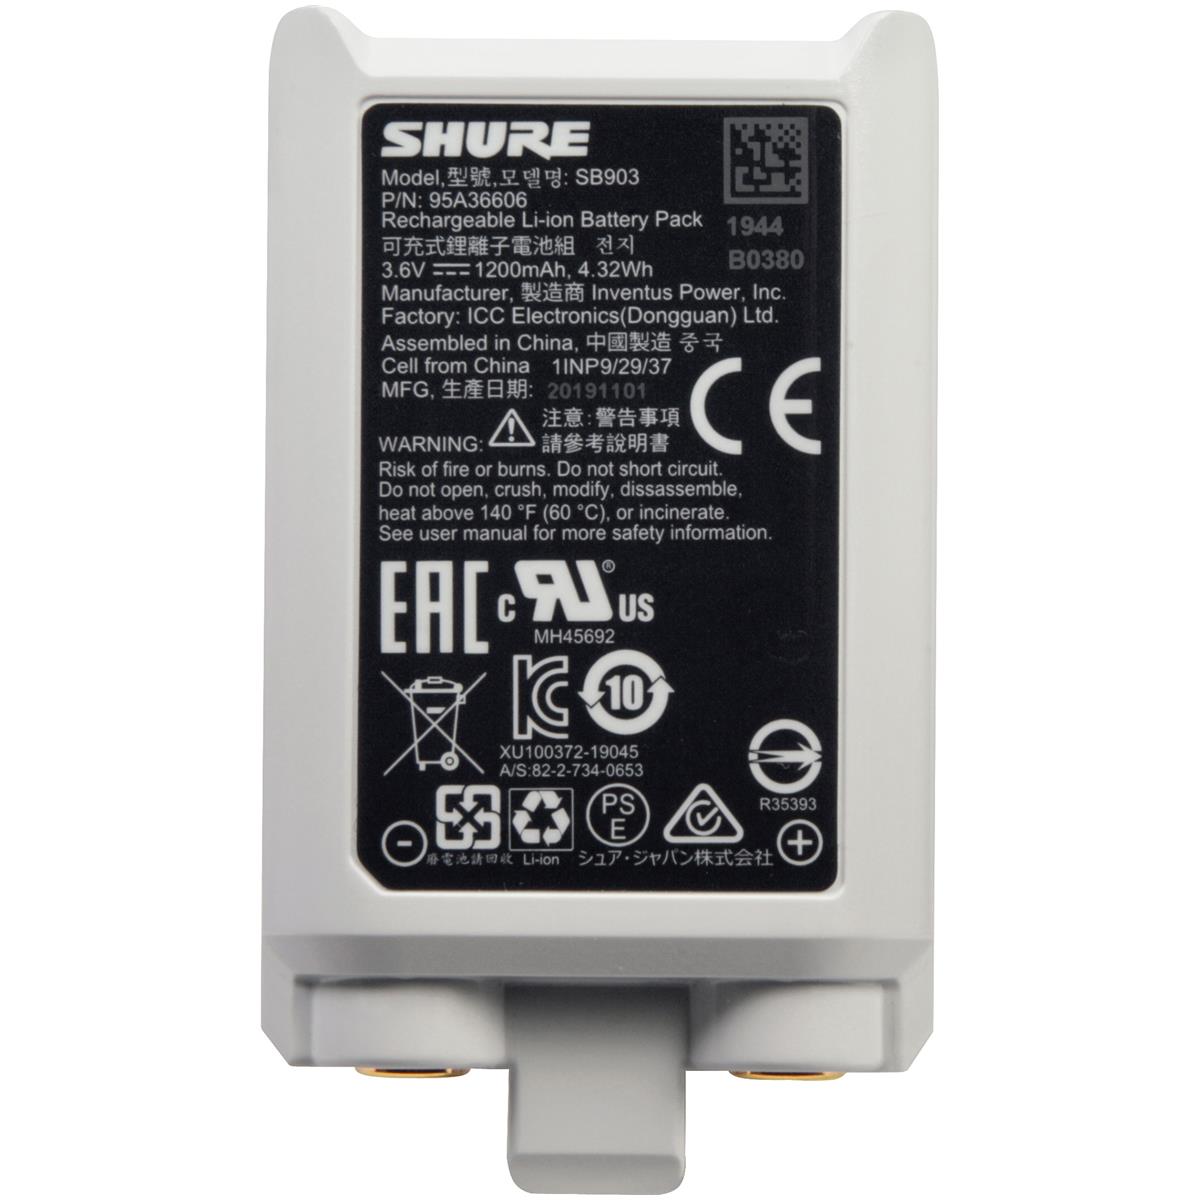 

Shure SB903 Lithium-Ion Rechargeable Battery for SLX-D